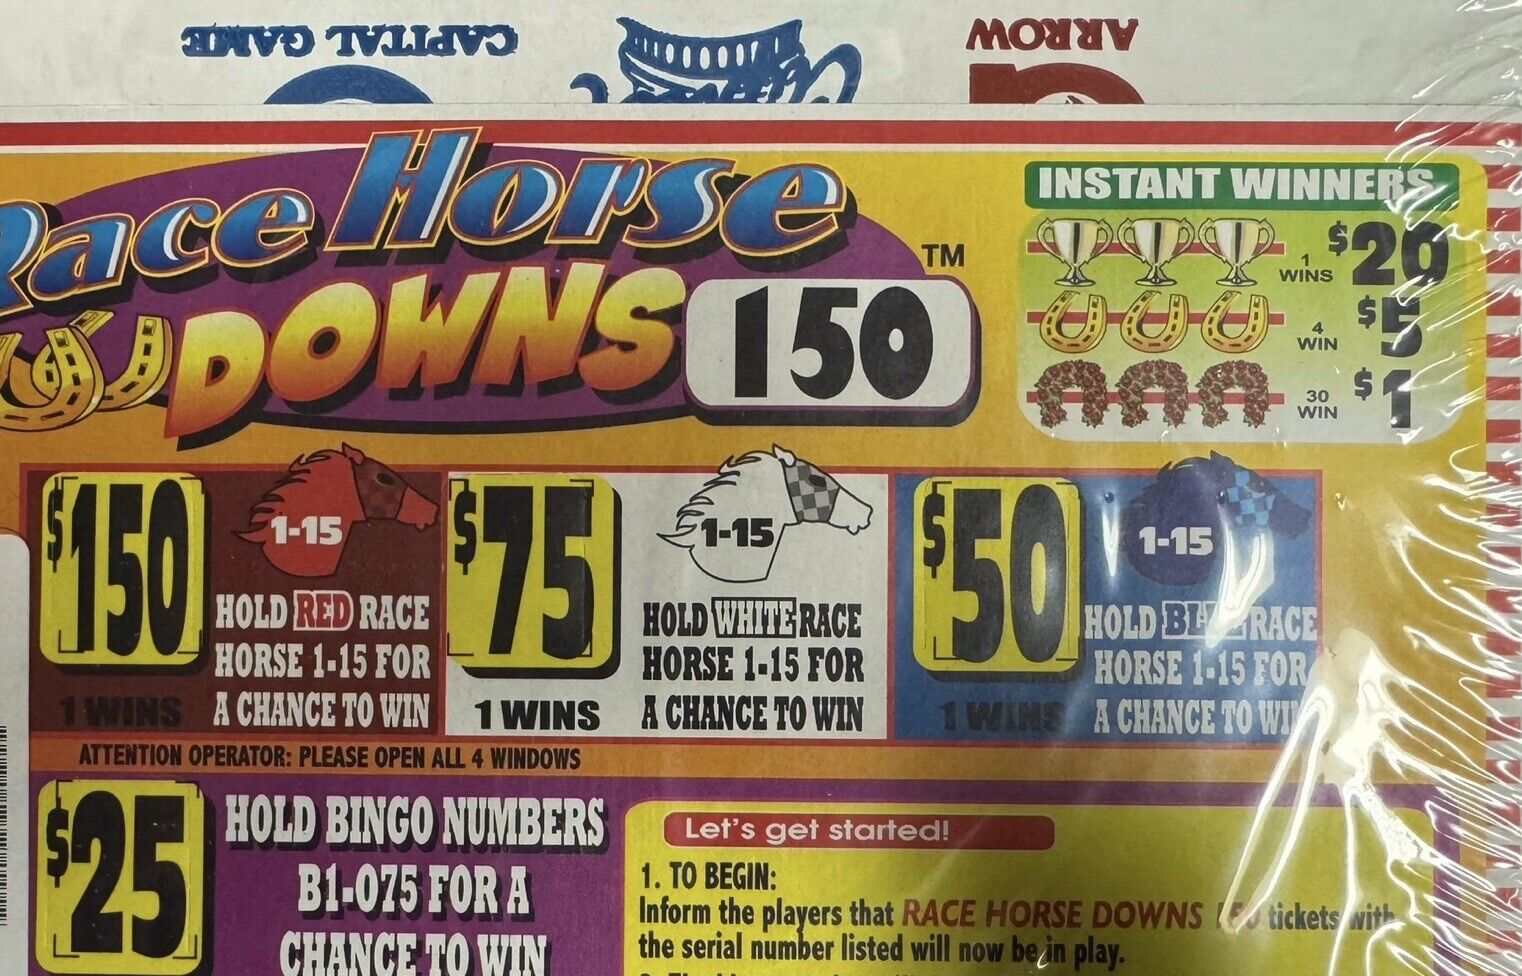 NEW pull tickets Race Horse Downs 680 - Seal Card Tabs